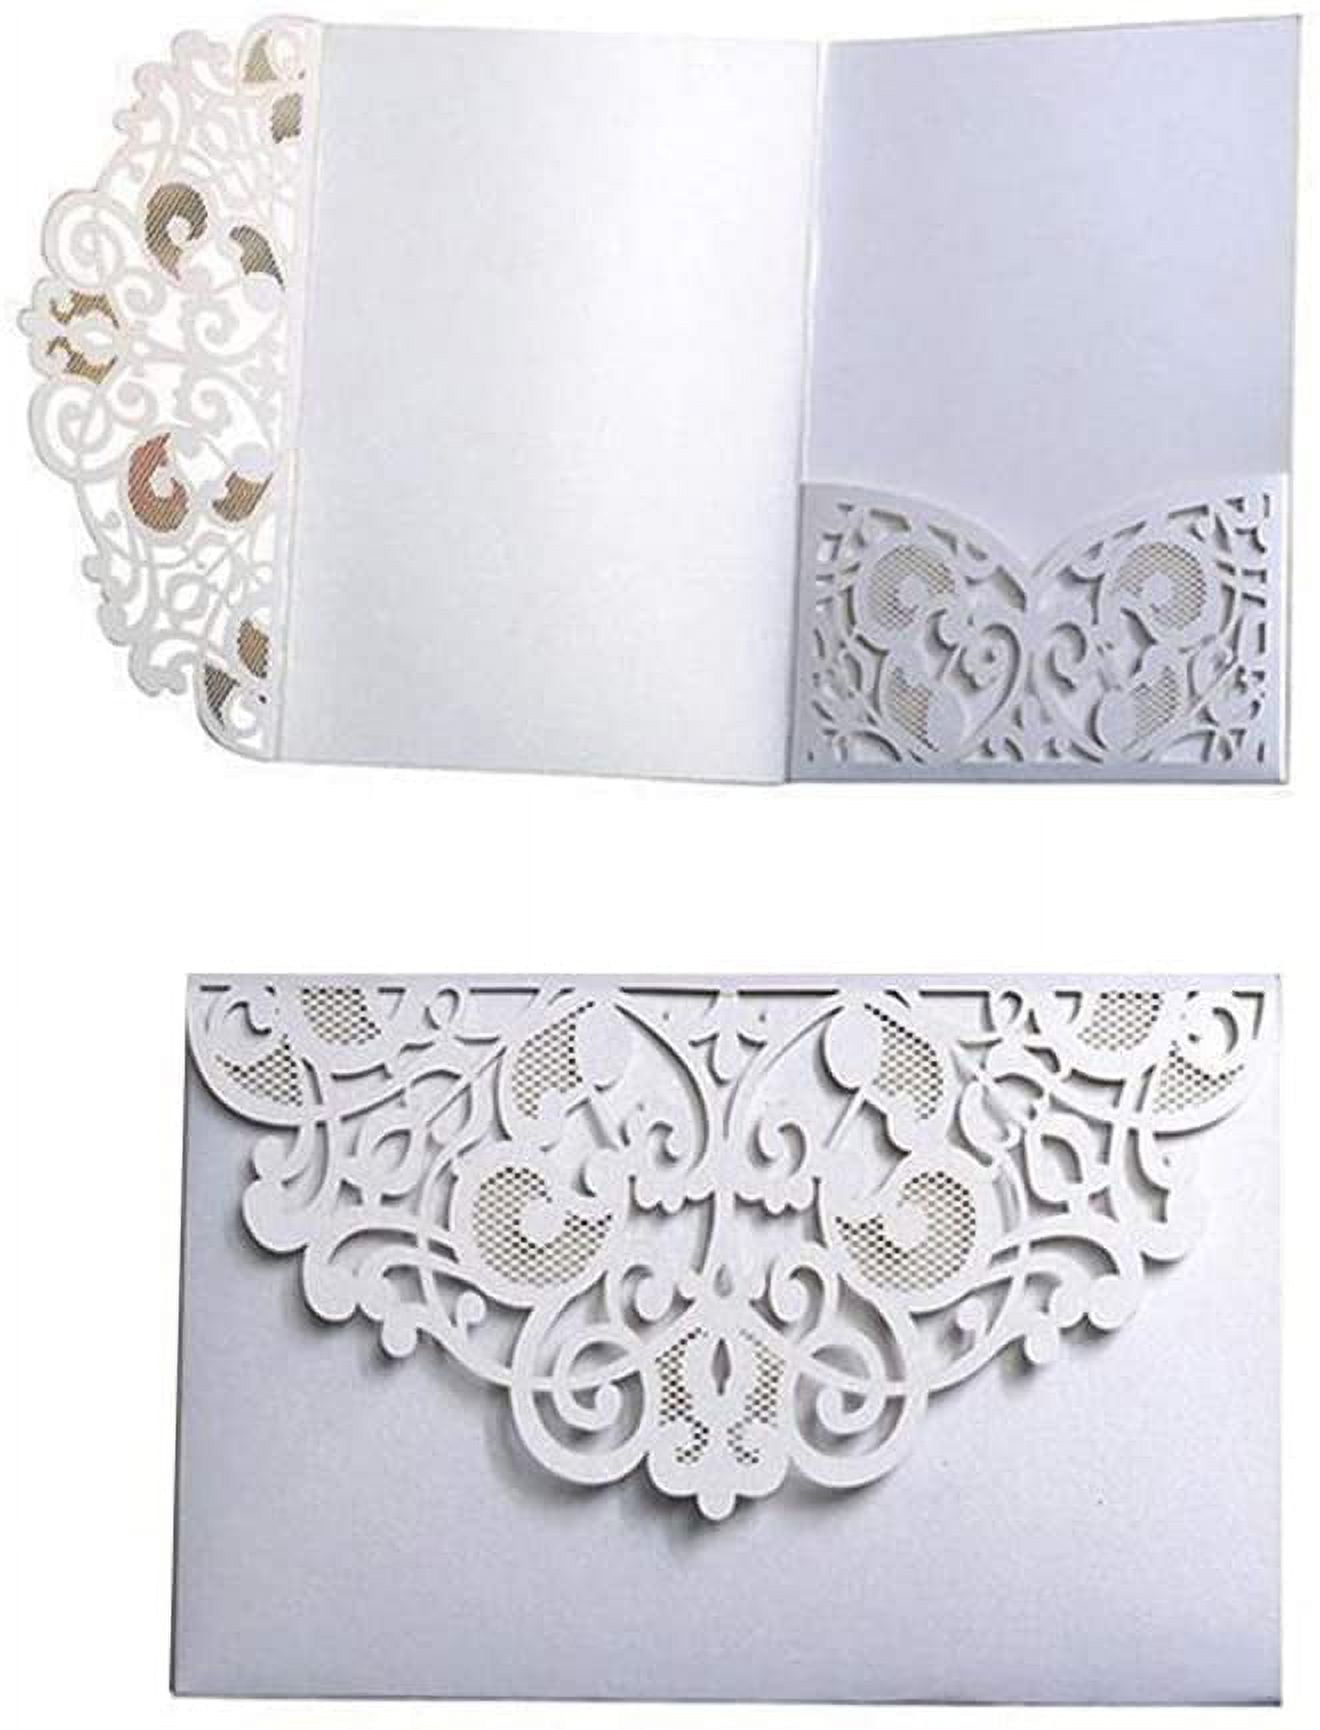 WISHMADE 50Pcs White Laser Cut Invitation Card Stock with Envelopes, Blank  Invitations Printable, for Wedding Bridal Shower Engagement Birthday